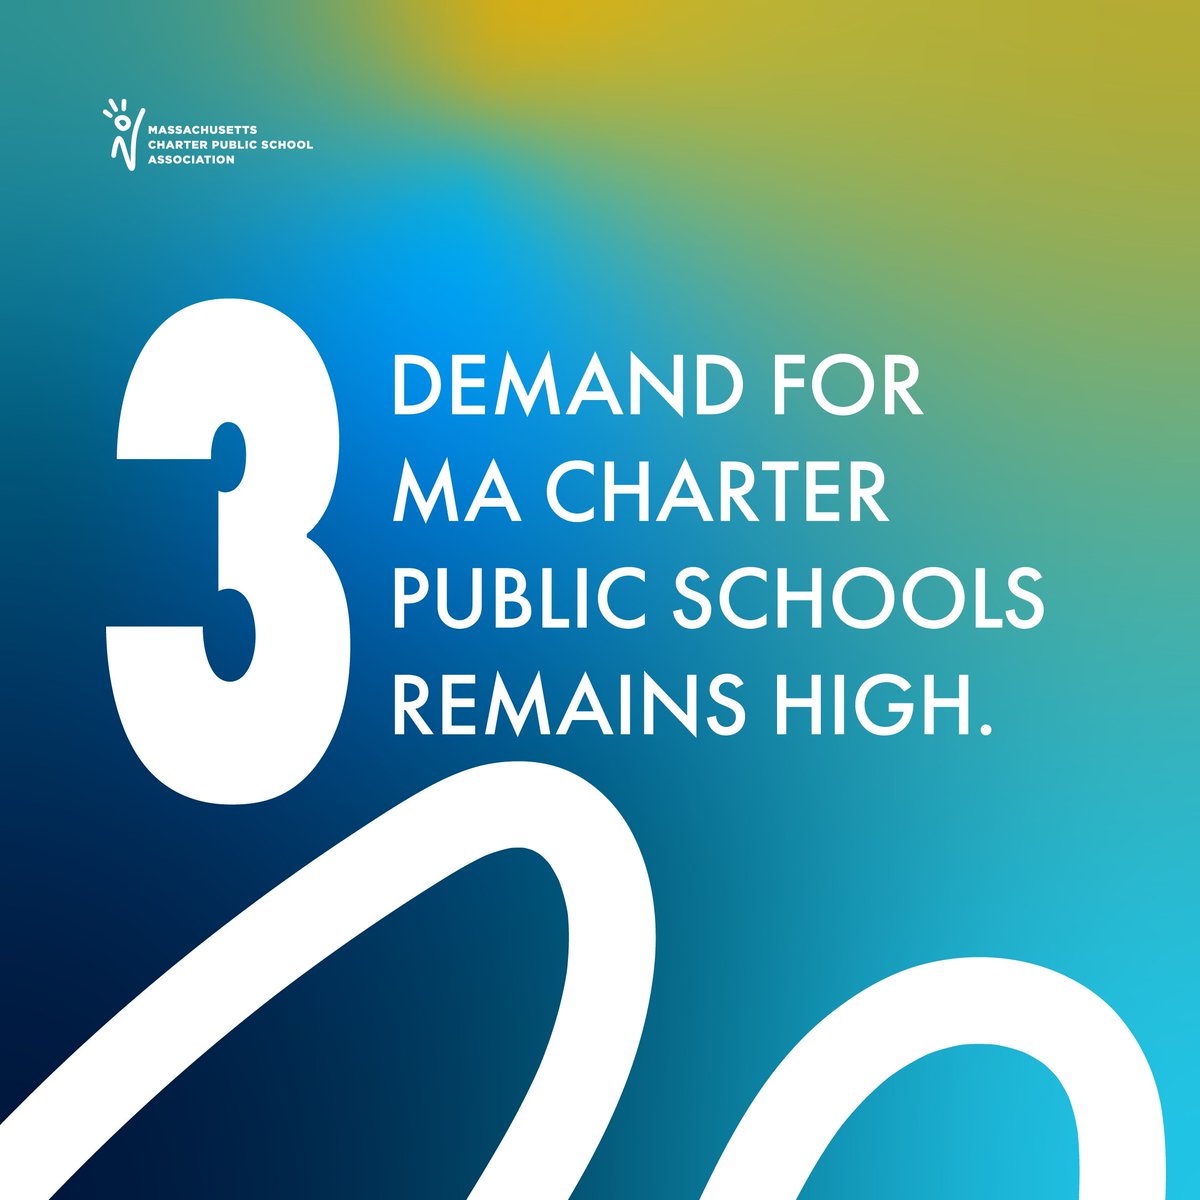 📌 Reminder during National #CharterSchoolsWeek: Charter public schools are FREE, public, and open to all! They're a valuable part of the public education system for families across the Commonwealth. 🌟 Be sure to save these facts and share them with a friend. #EdThatAddsUp